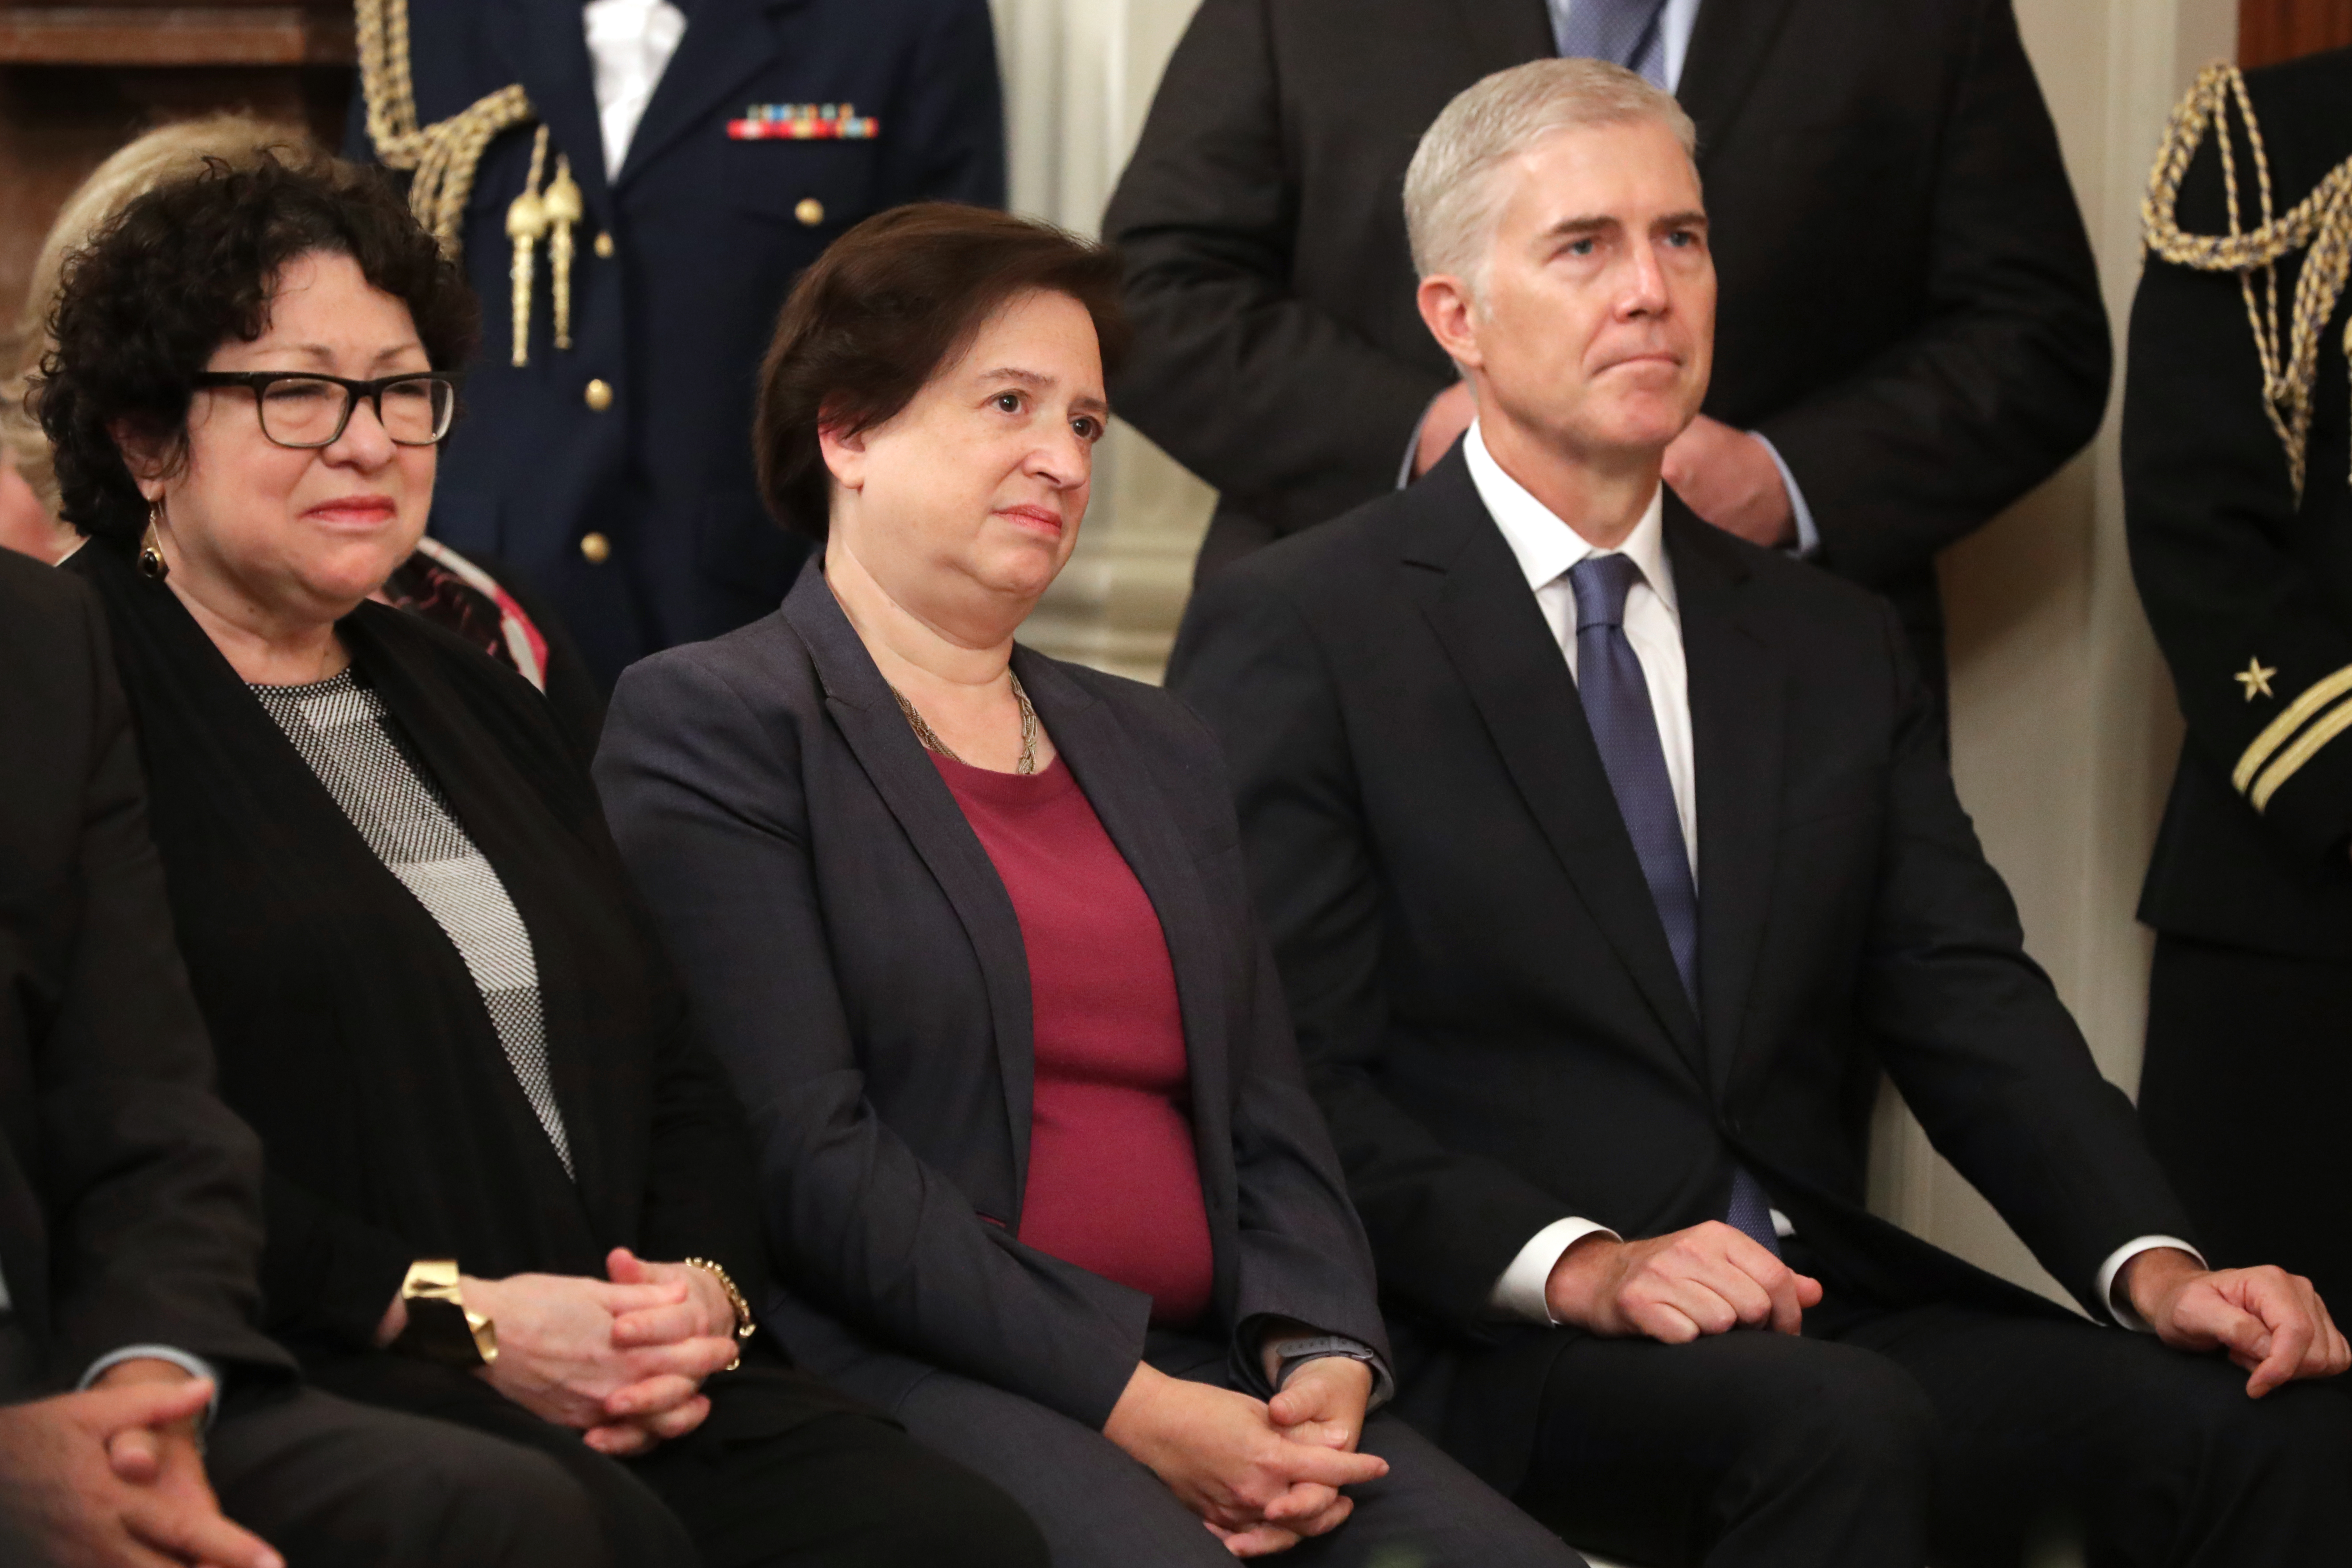 Justices Sonia Sotomayor, Elena Kagan and Neil Gorsuch attend the swearing in ceremony for Justice Brett Kavanaugh at the White House on October 08, 2018. (Chip Somodevilla/Getty Images)